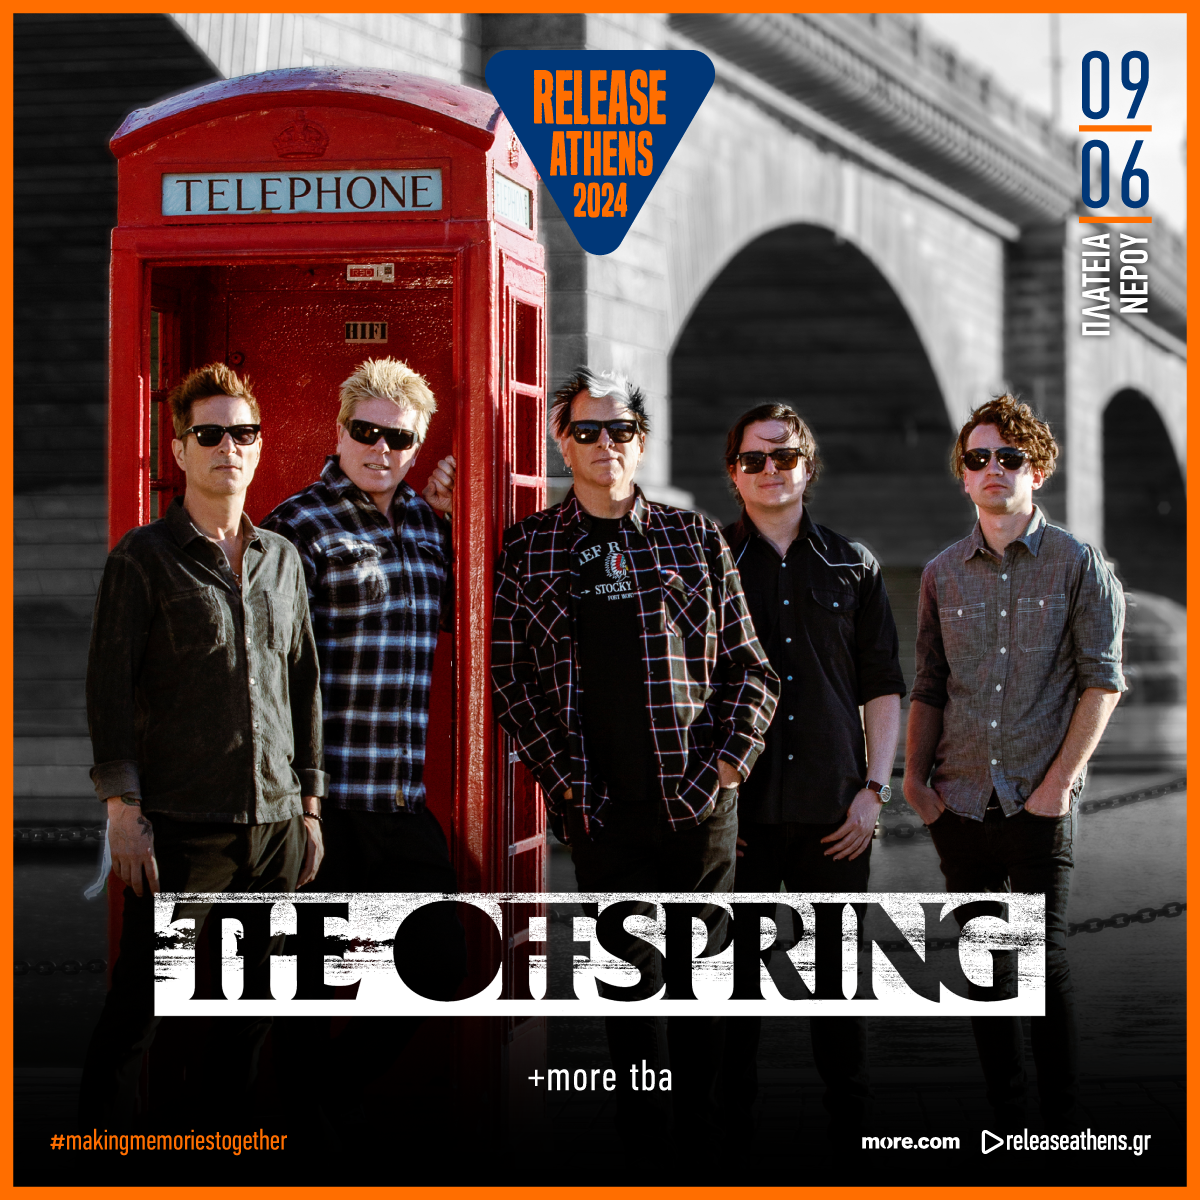 offspring release athens